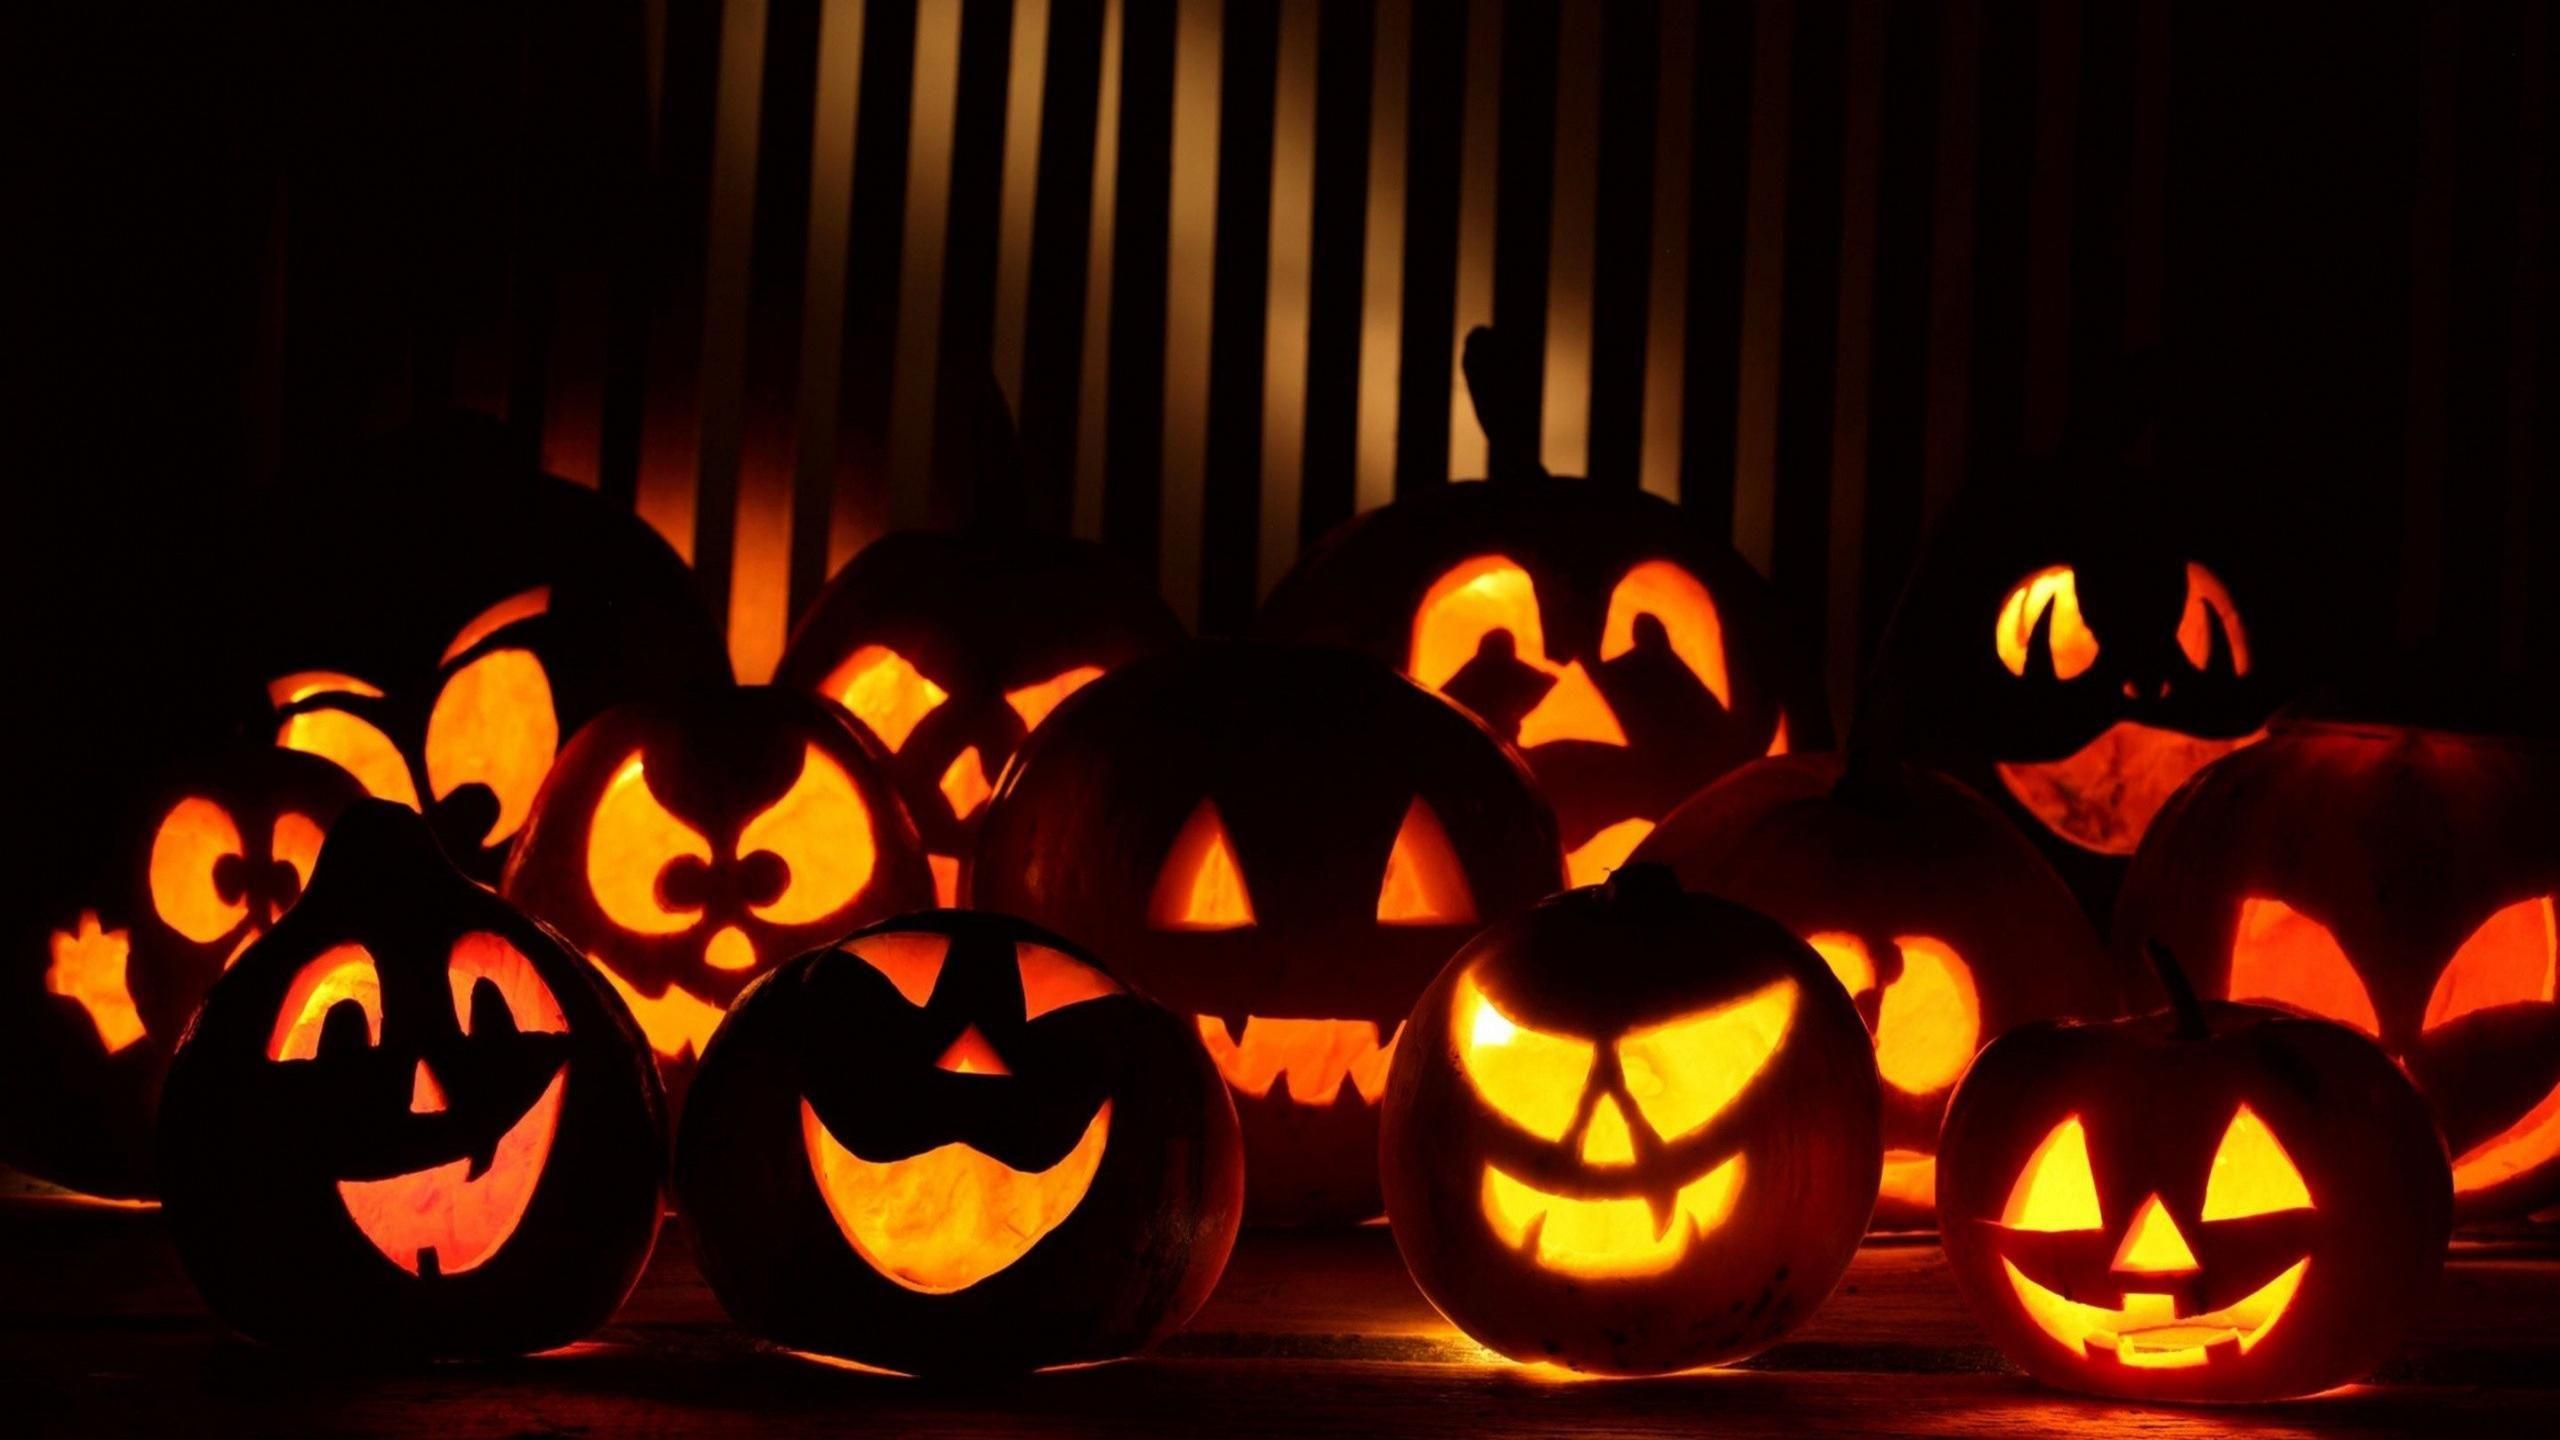 Want to get spooked? These Halloween events will be 'scary' fun